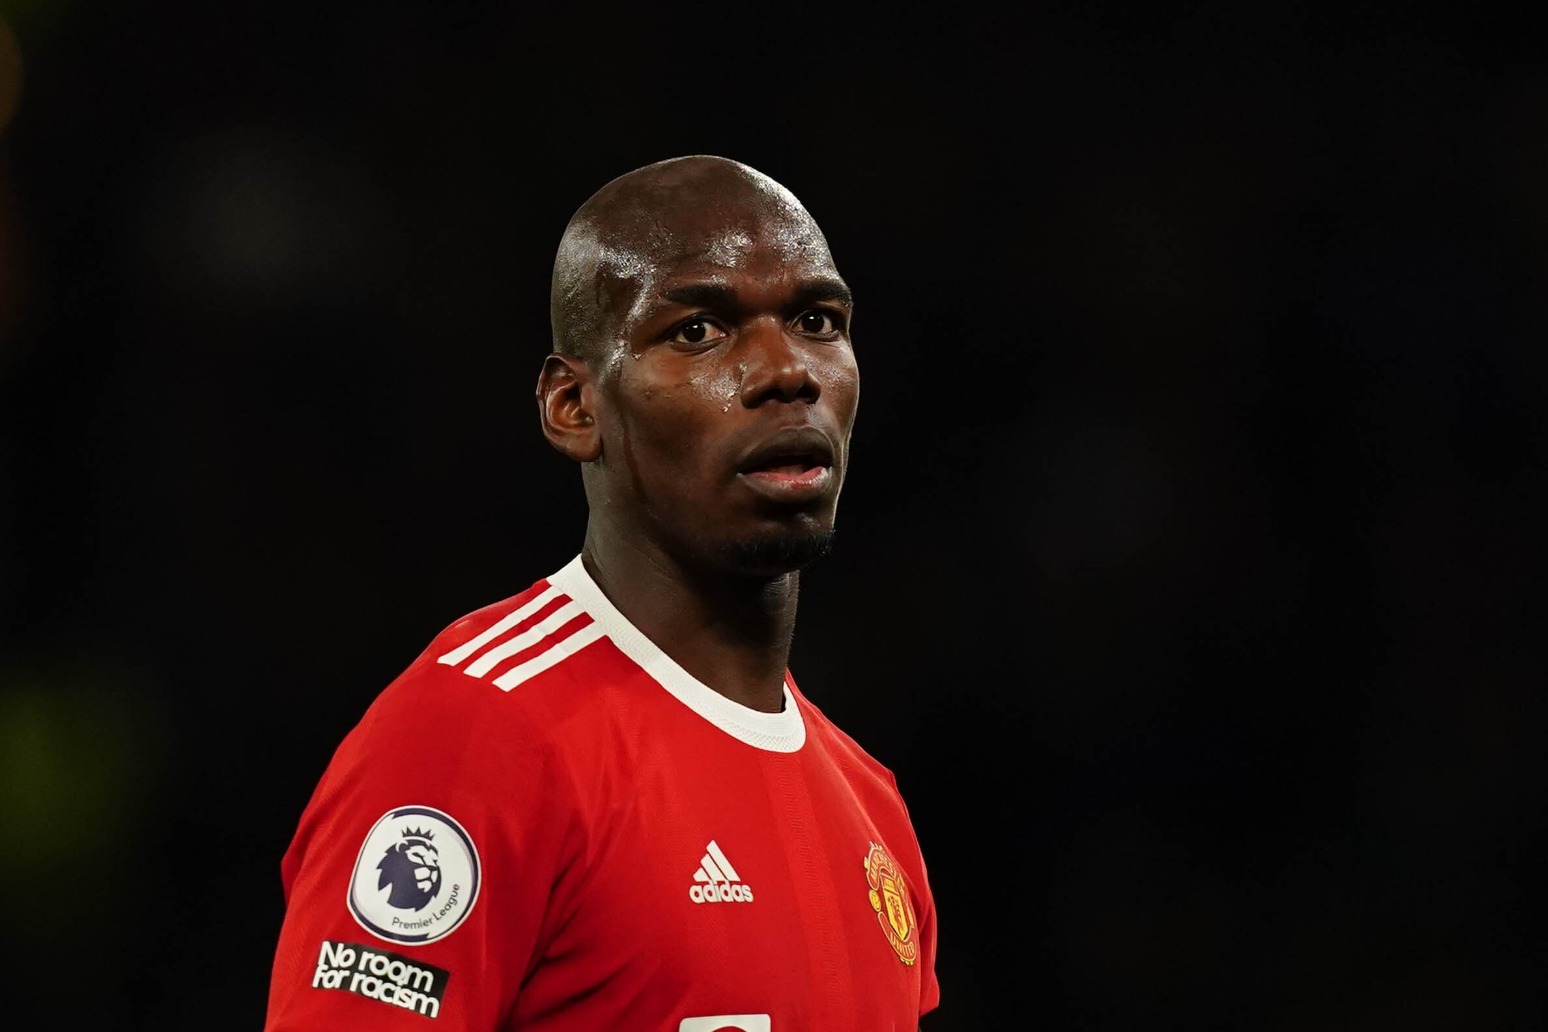 Paul Pogba wants Man Utd to continue beautiful reaction to derby defeat